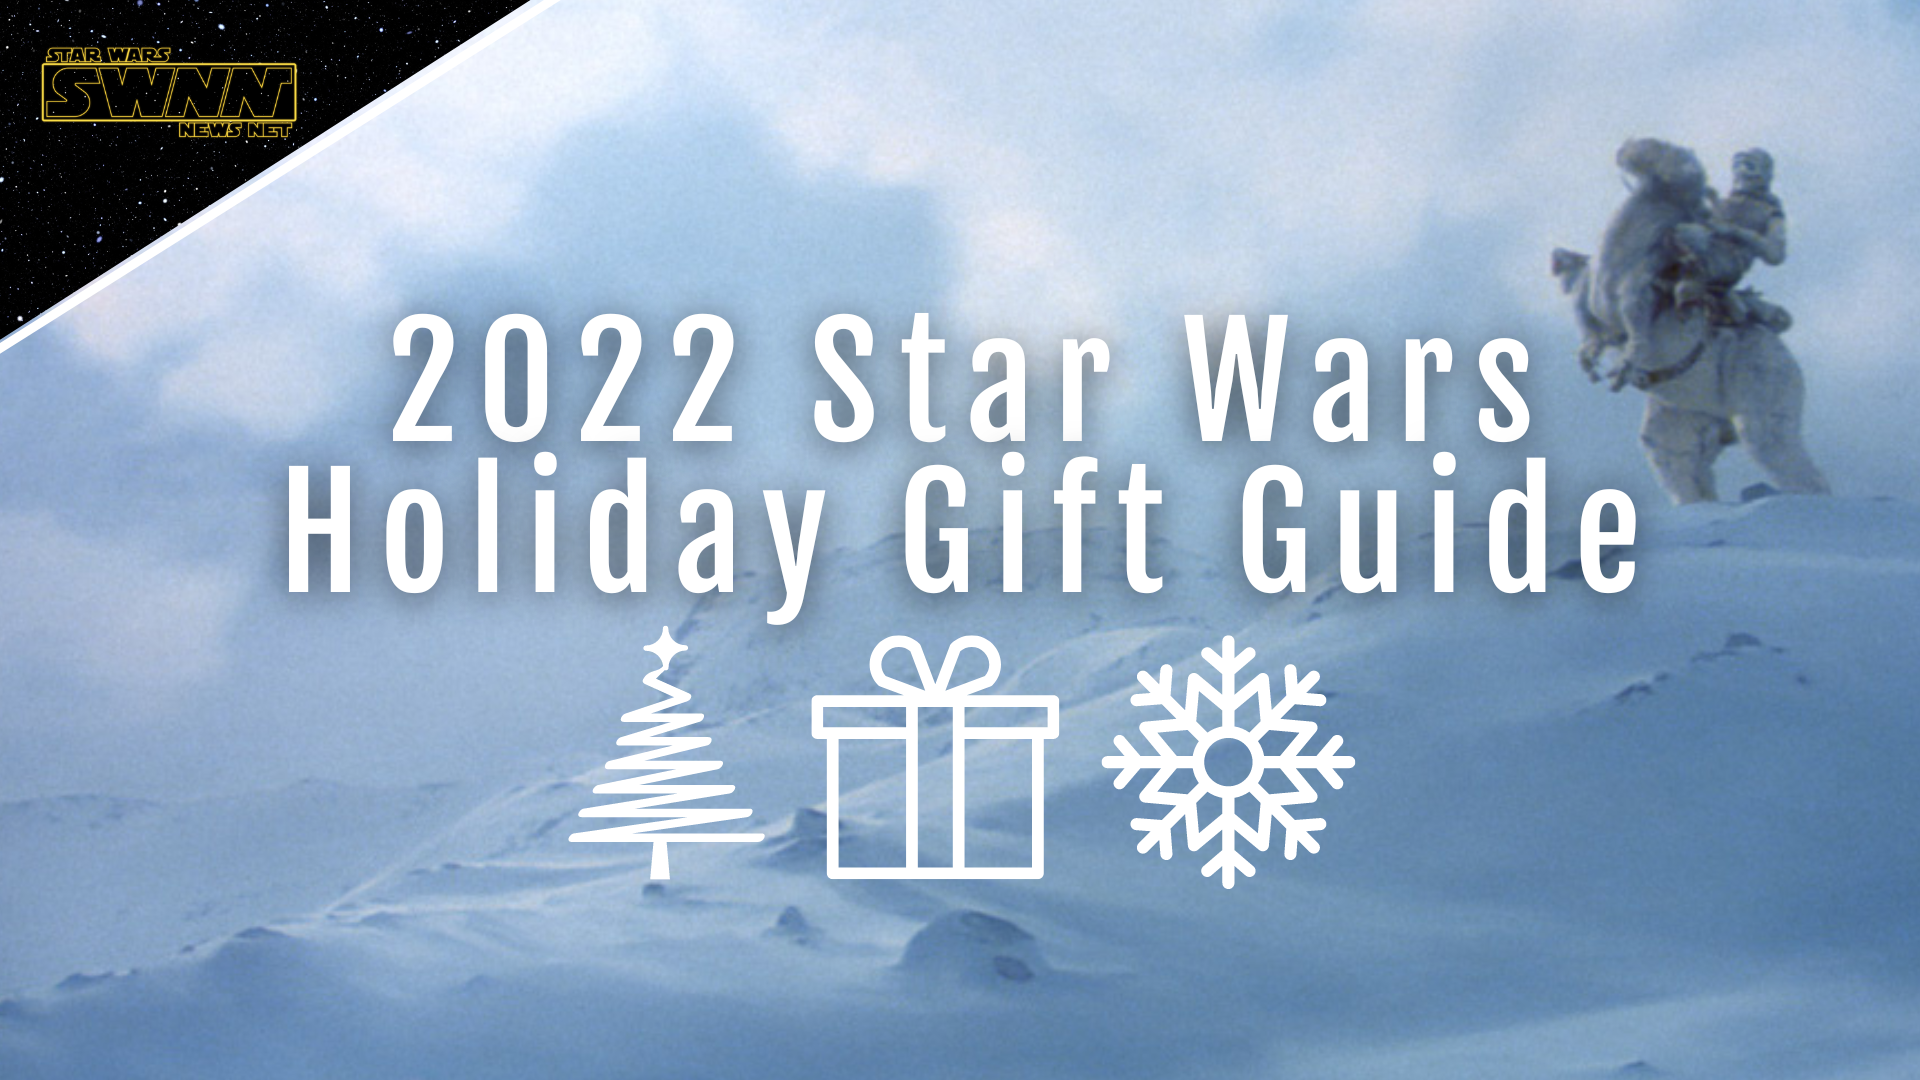 Star Wars Holiday Gift Guide 2022